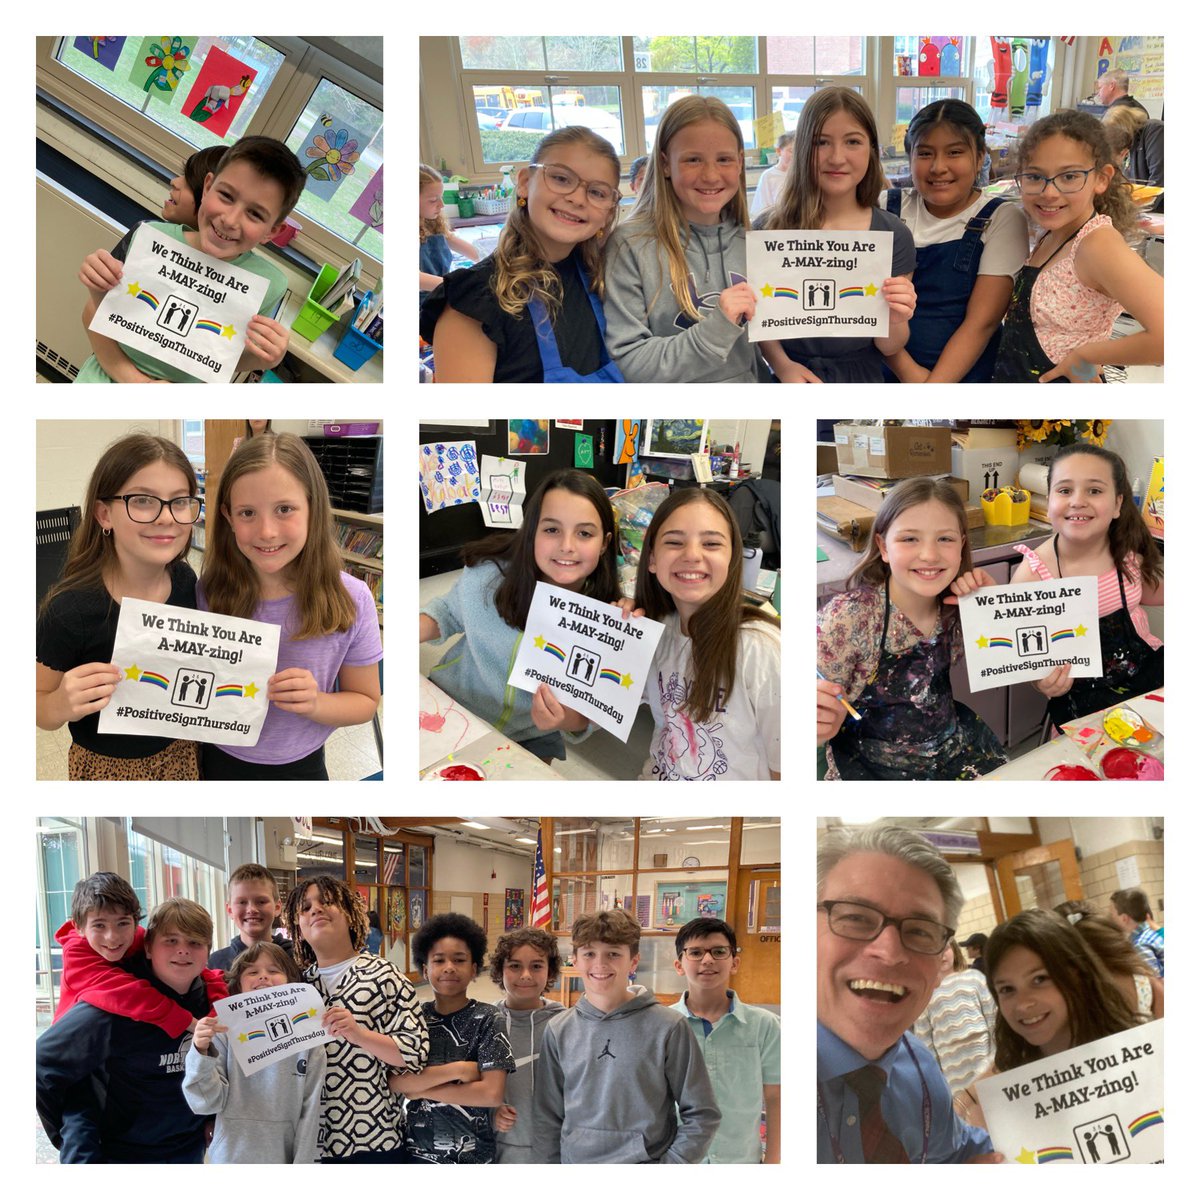 On this first #PositiveSignThursday of the month we love celebrating How A-MAY-zing We Know our smiling fabulous students are here in #HAYNation 😃💜👍